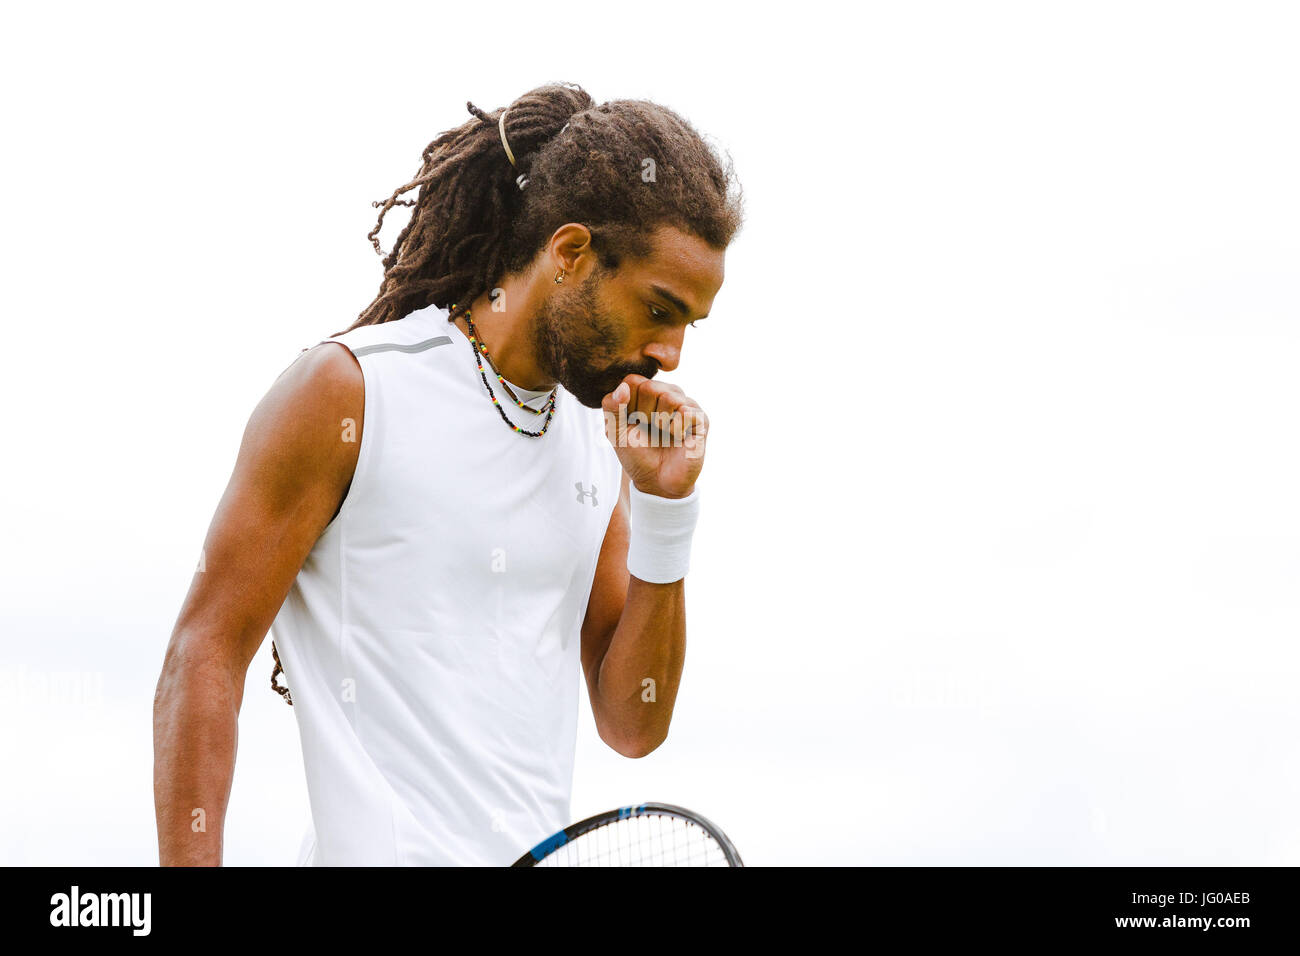 London, UK. 3rd July, 2017. German tennis player Dustin Brown in action during his 1st round match at the Wimbledon Tennis Championships 2017 at the All England Lawn Tennis and Croquet Club in London. Credit: Frank Molter/Alamy Live News Stock Photo